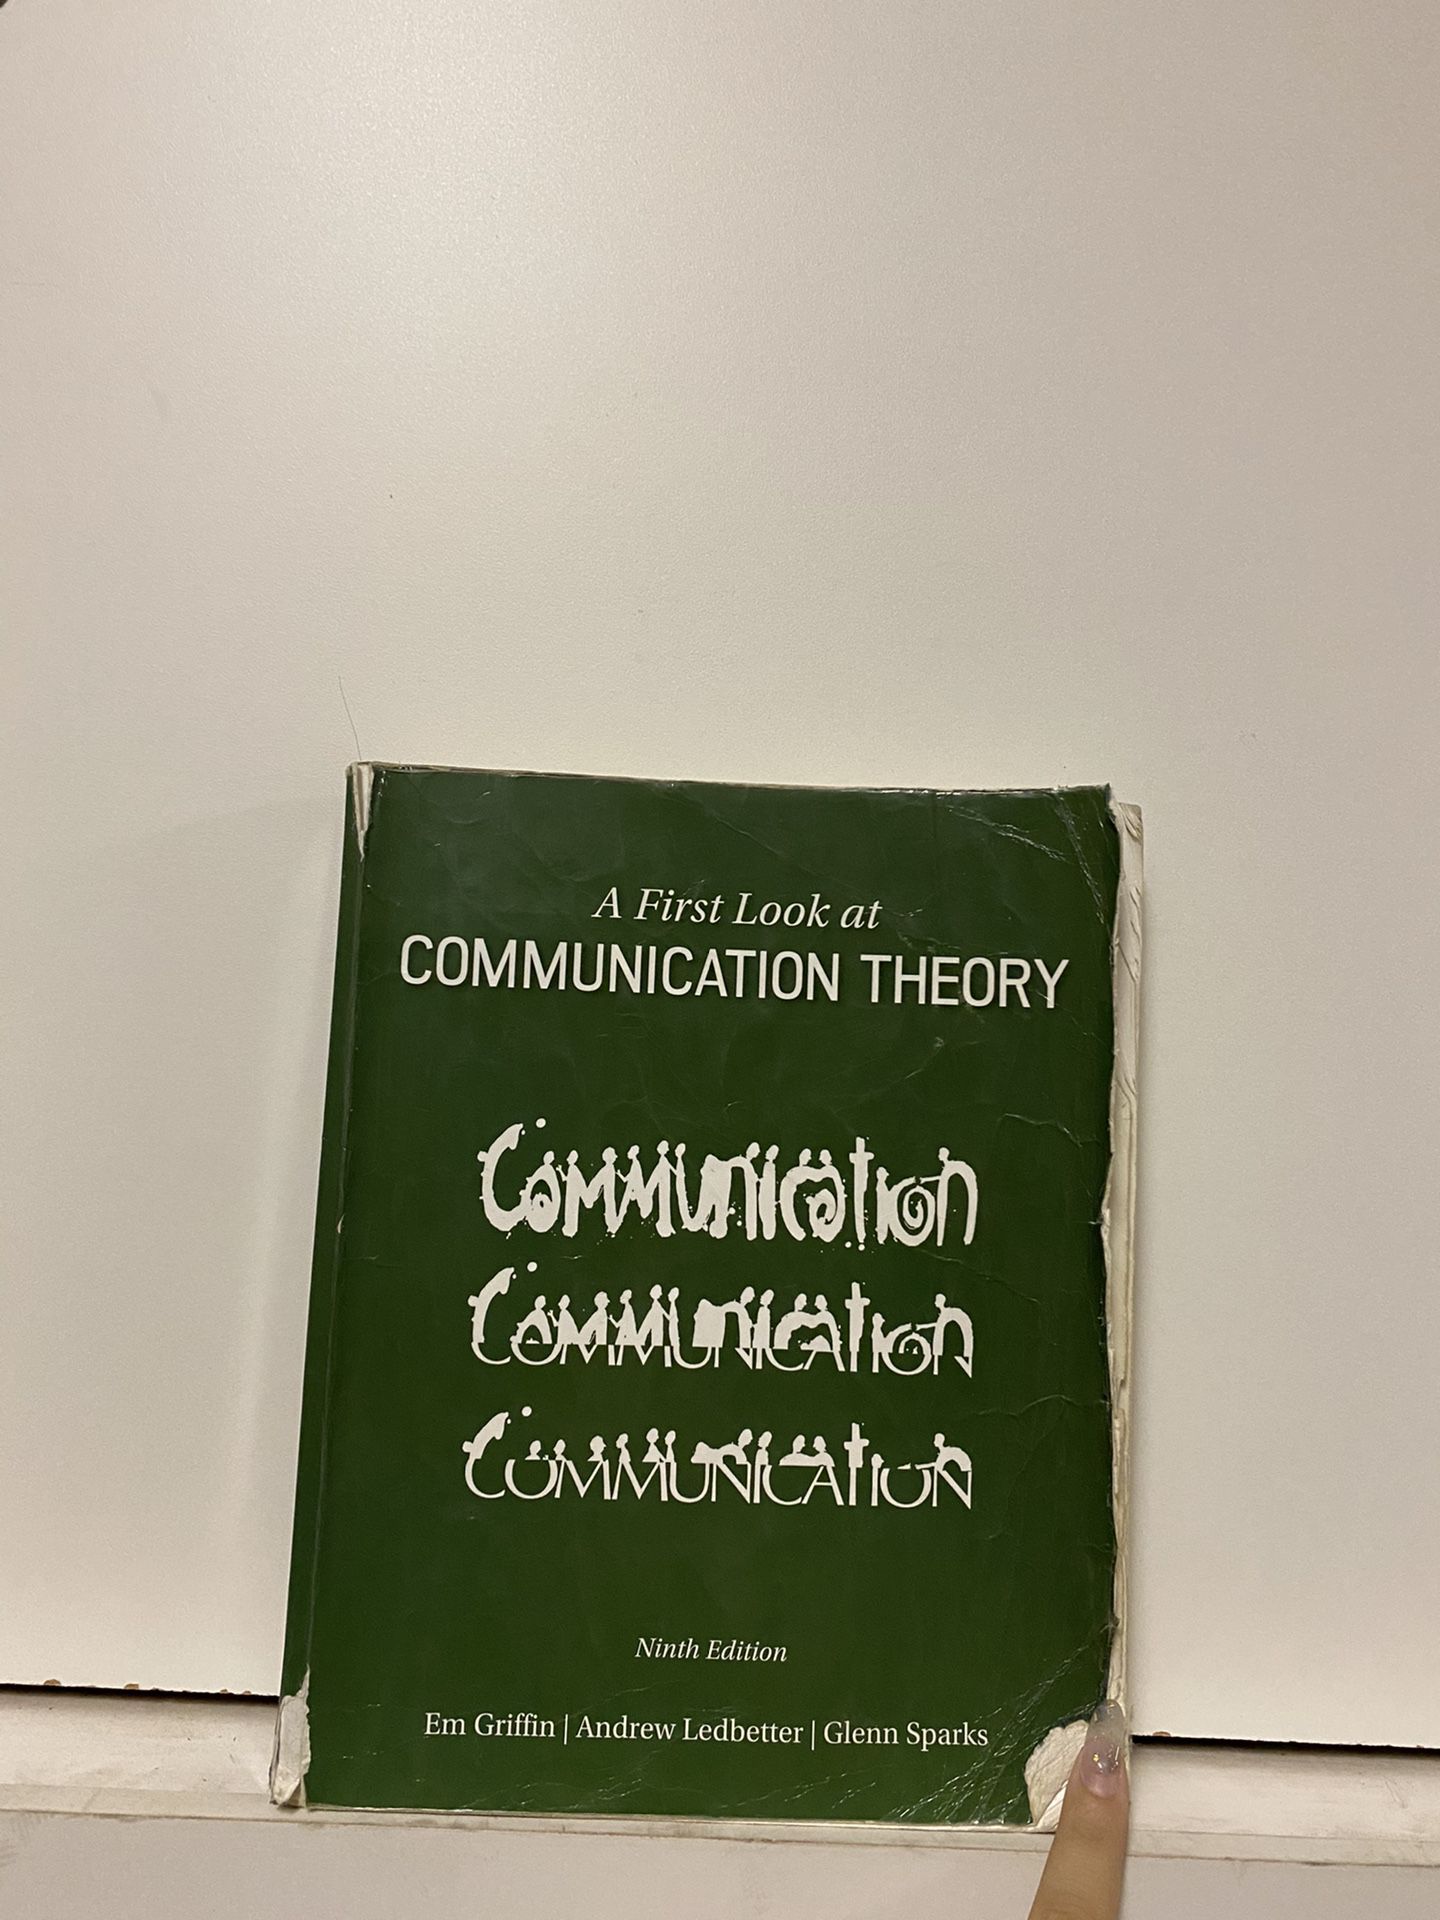 A First Look at Communication Theory (Conversations with Communication Theorists) 9th Edition